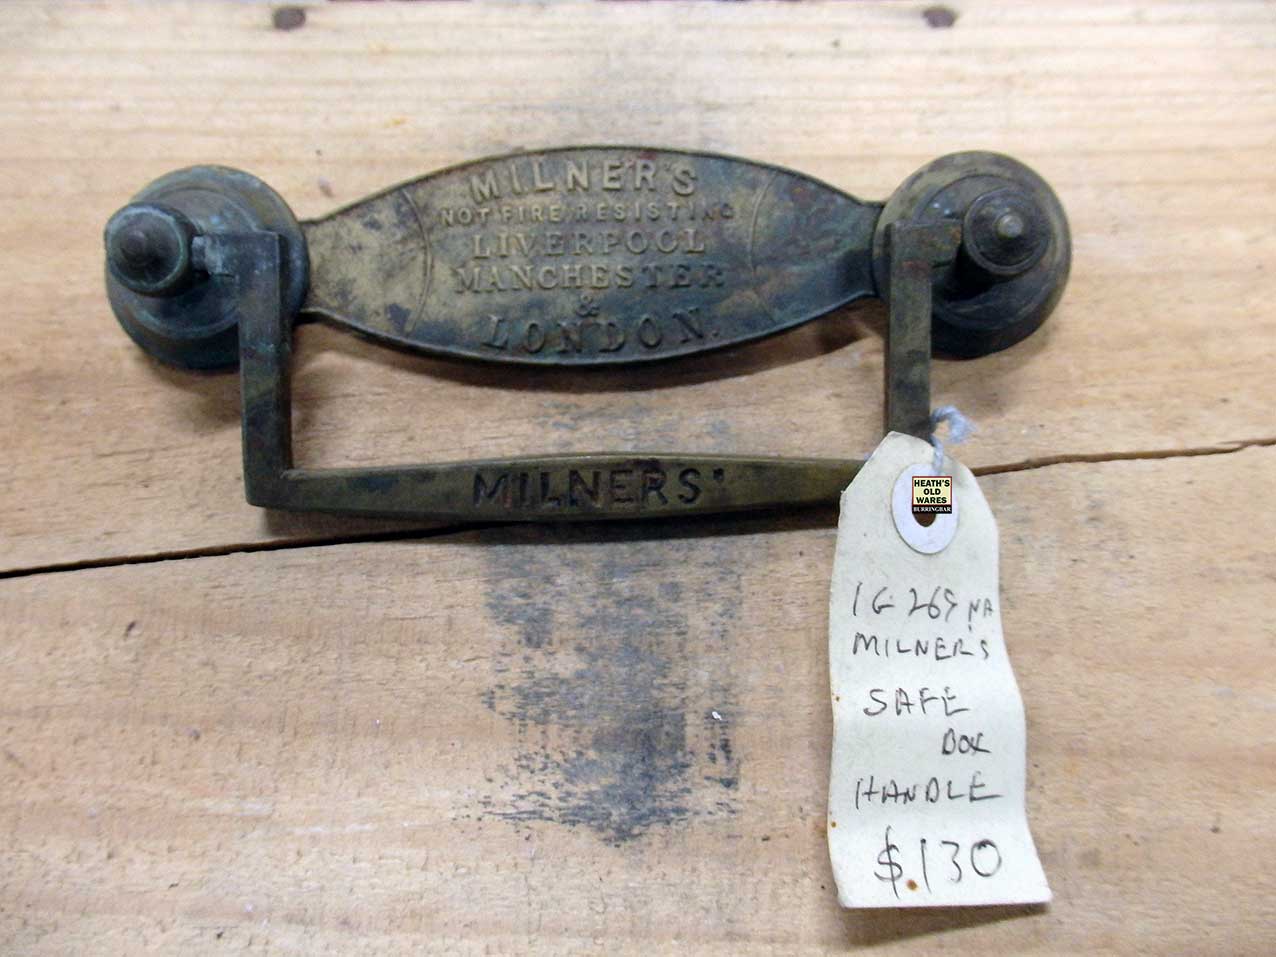 Antique brass safe handle for sale at Heaths Old Wares, Collectables, Antiques & Industrial Antiques, 19-21 Broadway, Burringbar NSW 2483 Ph 0266771181 open 7 days